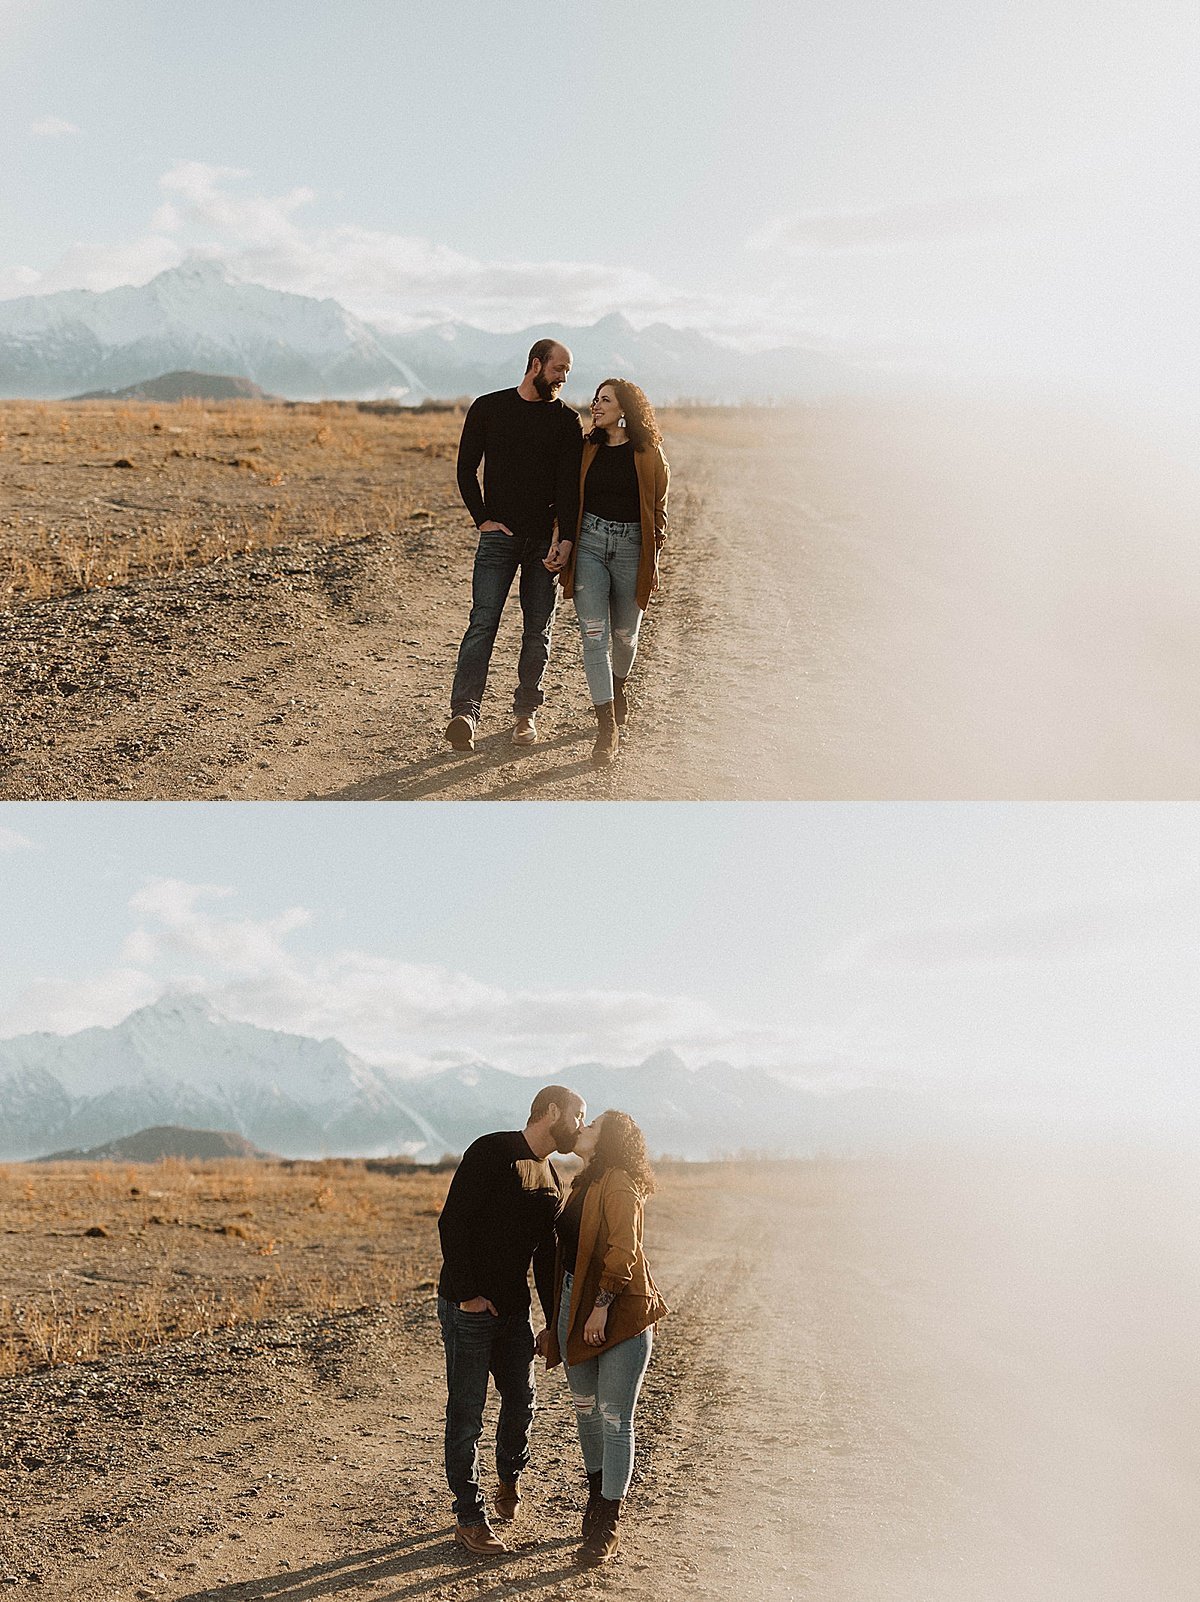  Engaged couple strolls dirt road in mountain park photoshoot by Theresa McDonald Photography 